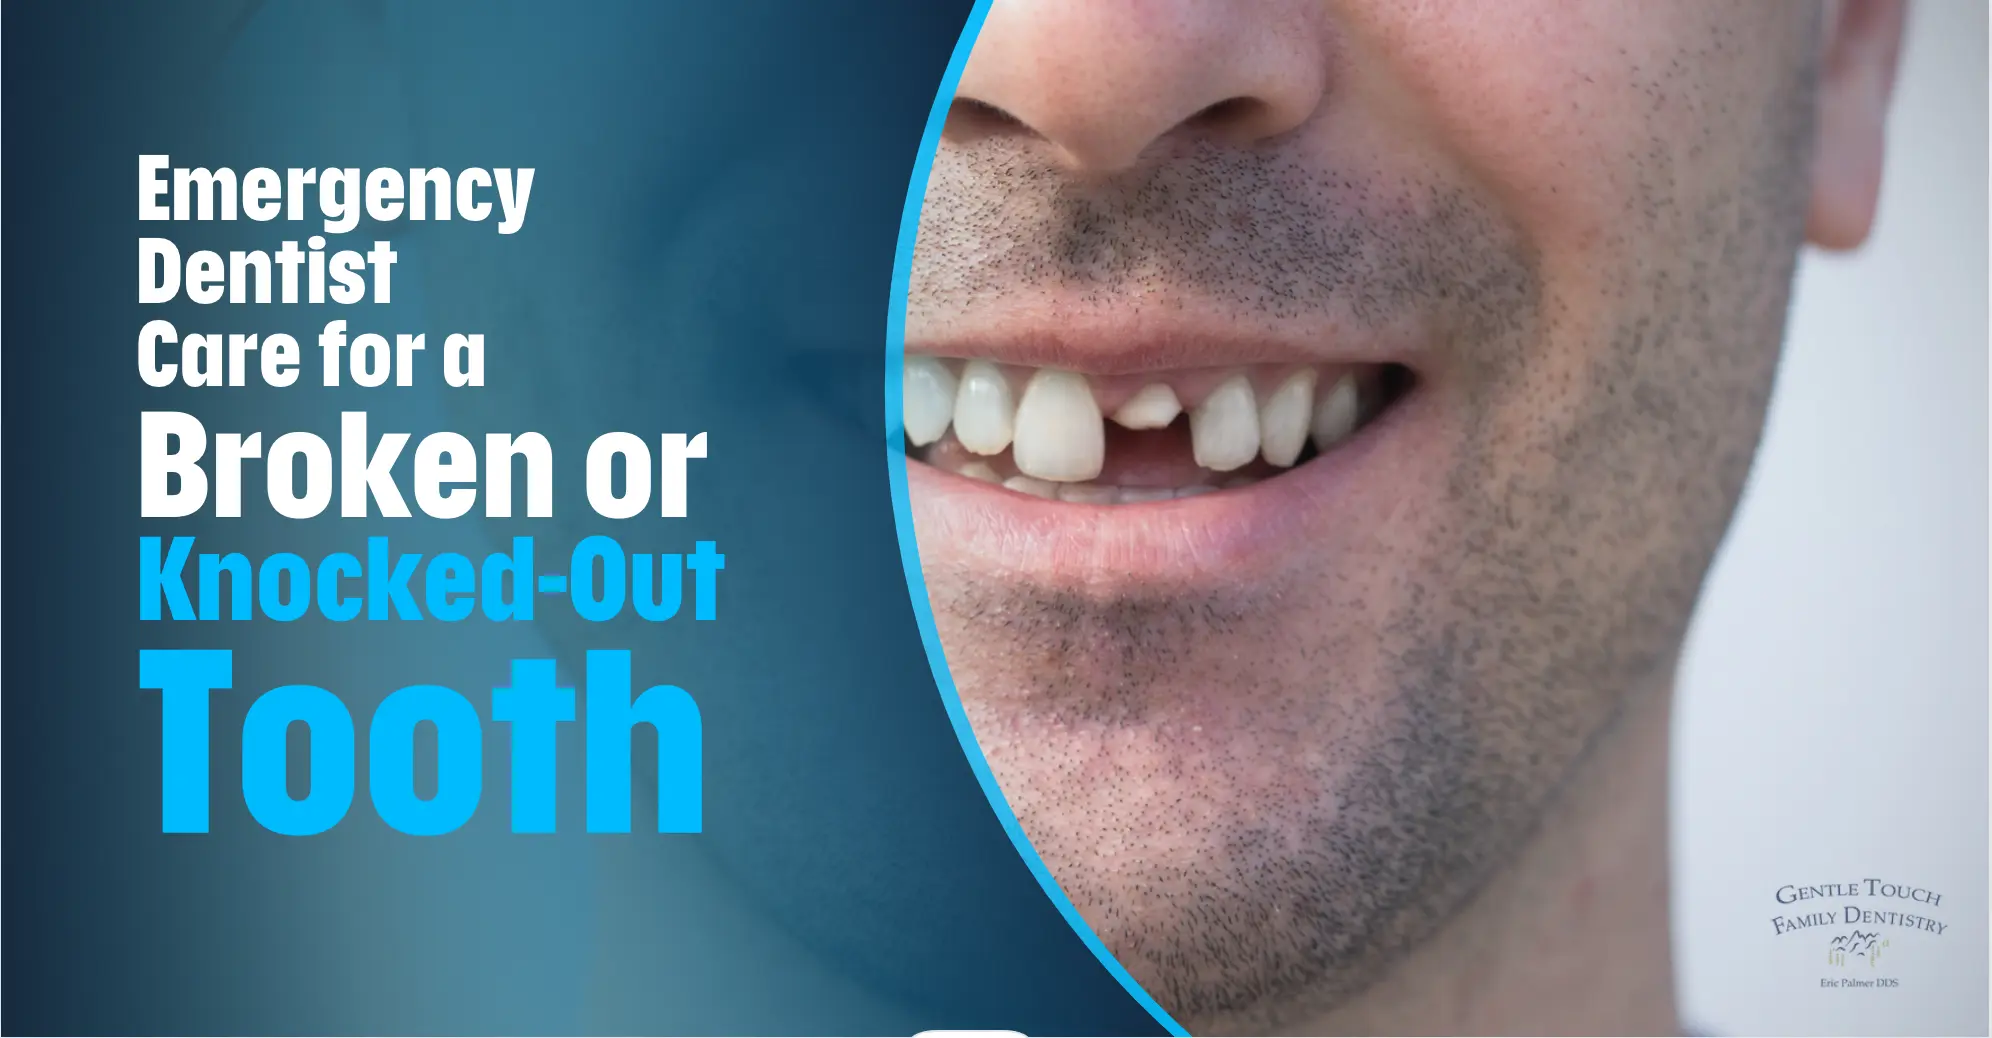 Emergency Dentist Care for a Broken or Knocked-Out Tooth